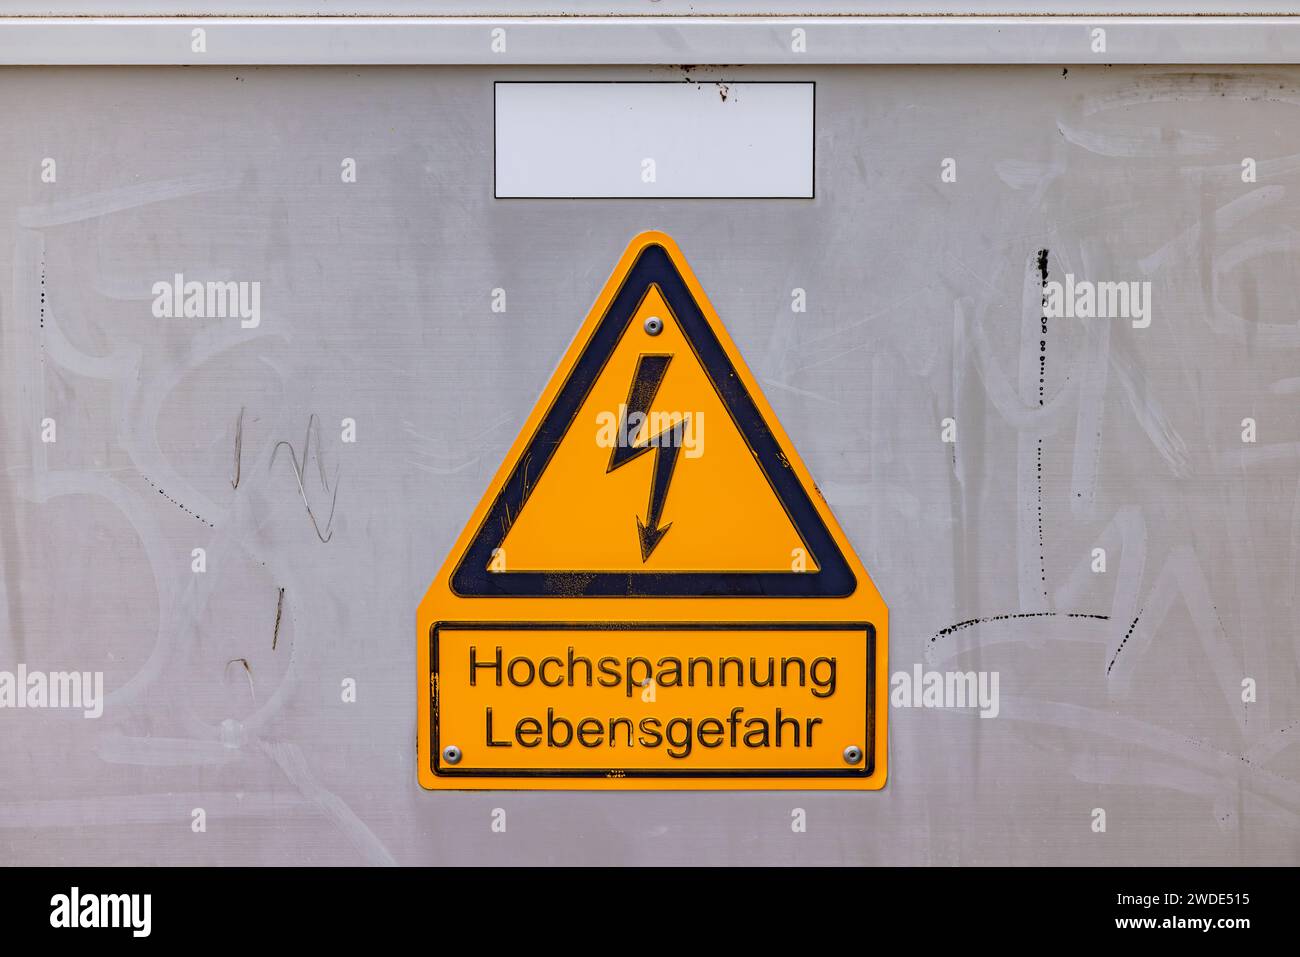 Yellow sign warning high voltage danger to life on electrical box with German text Stock Photo